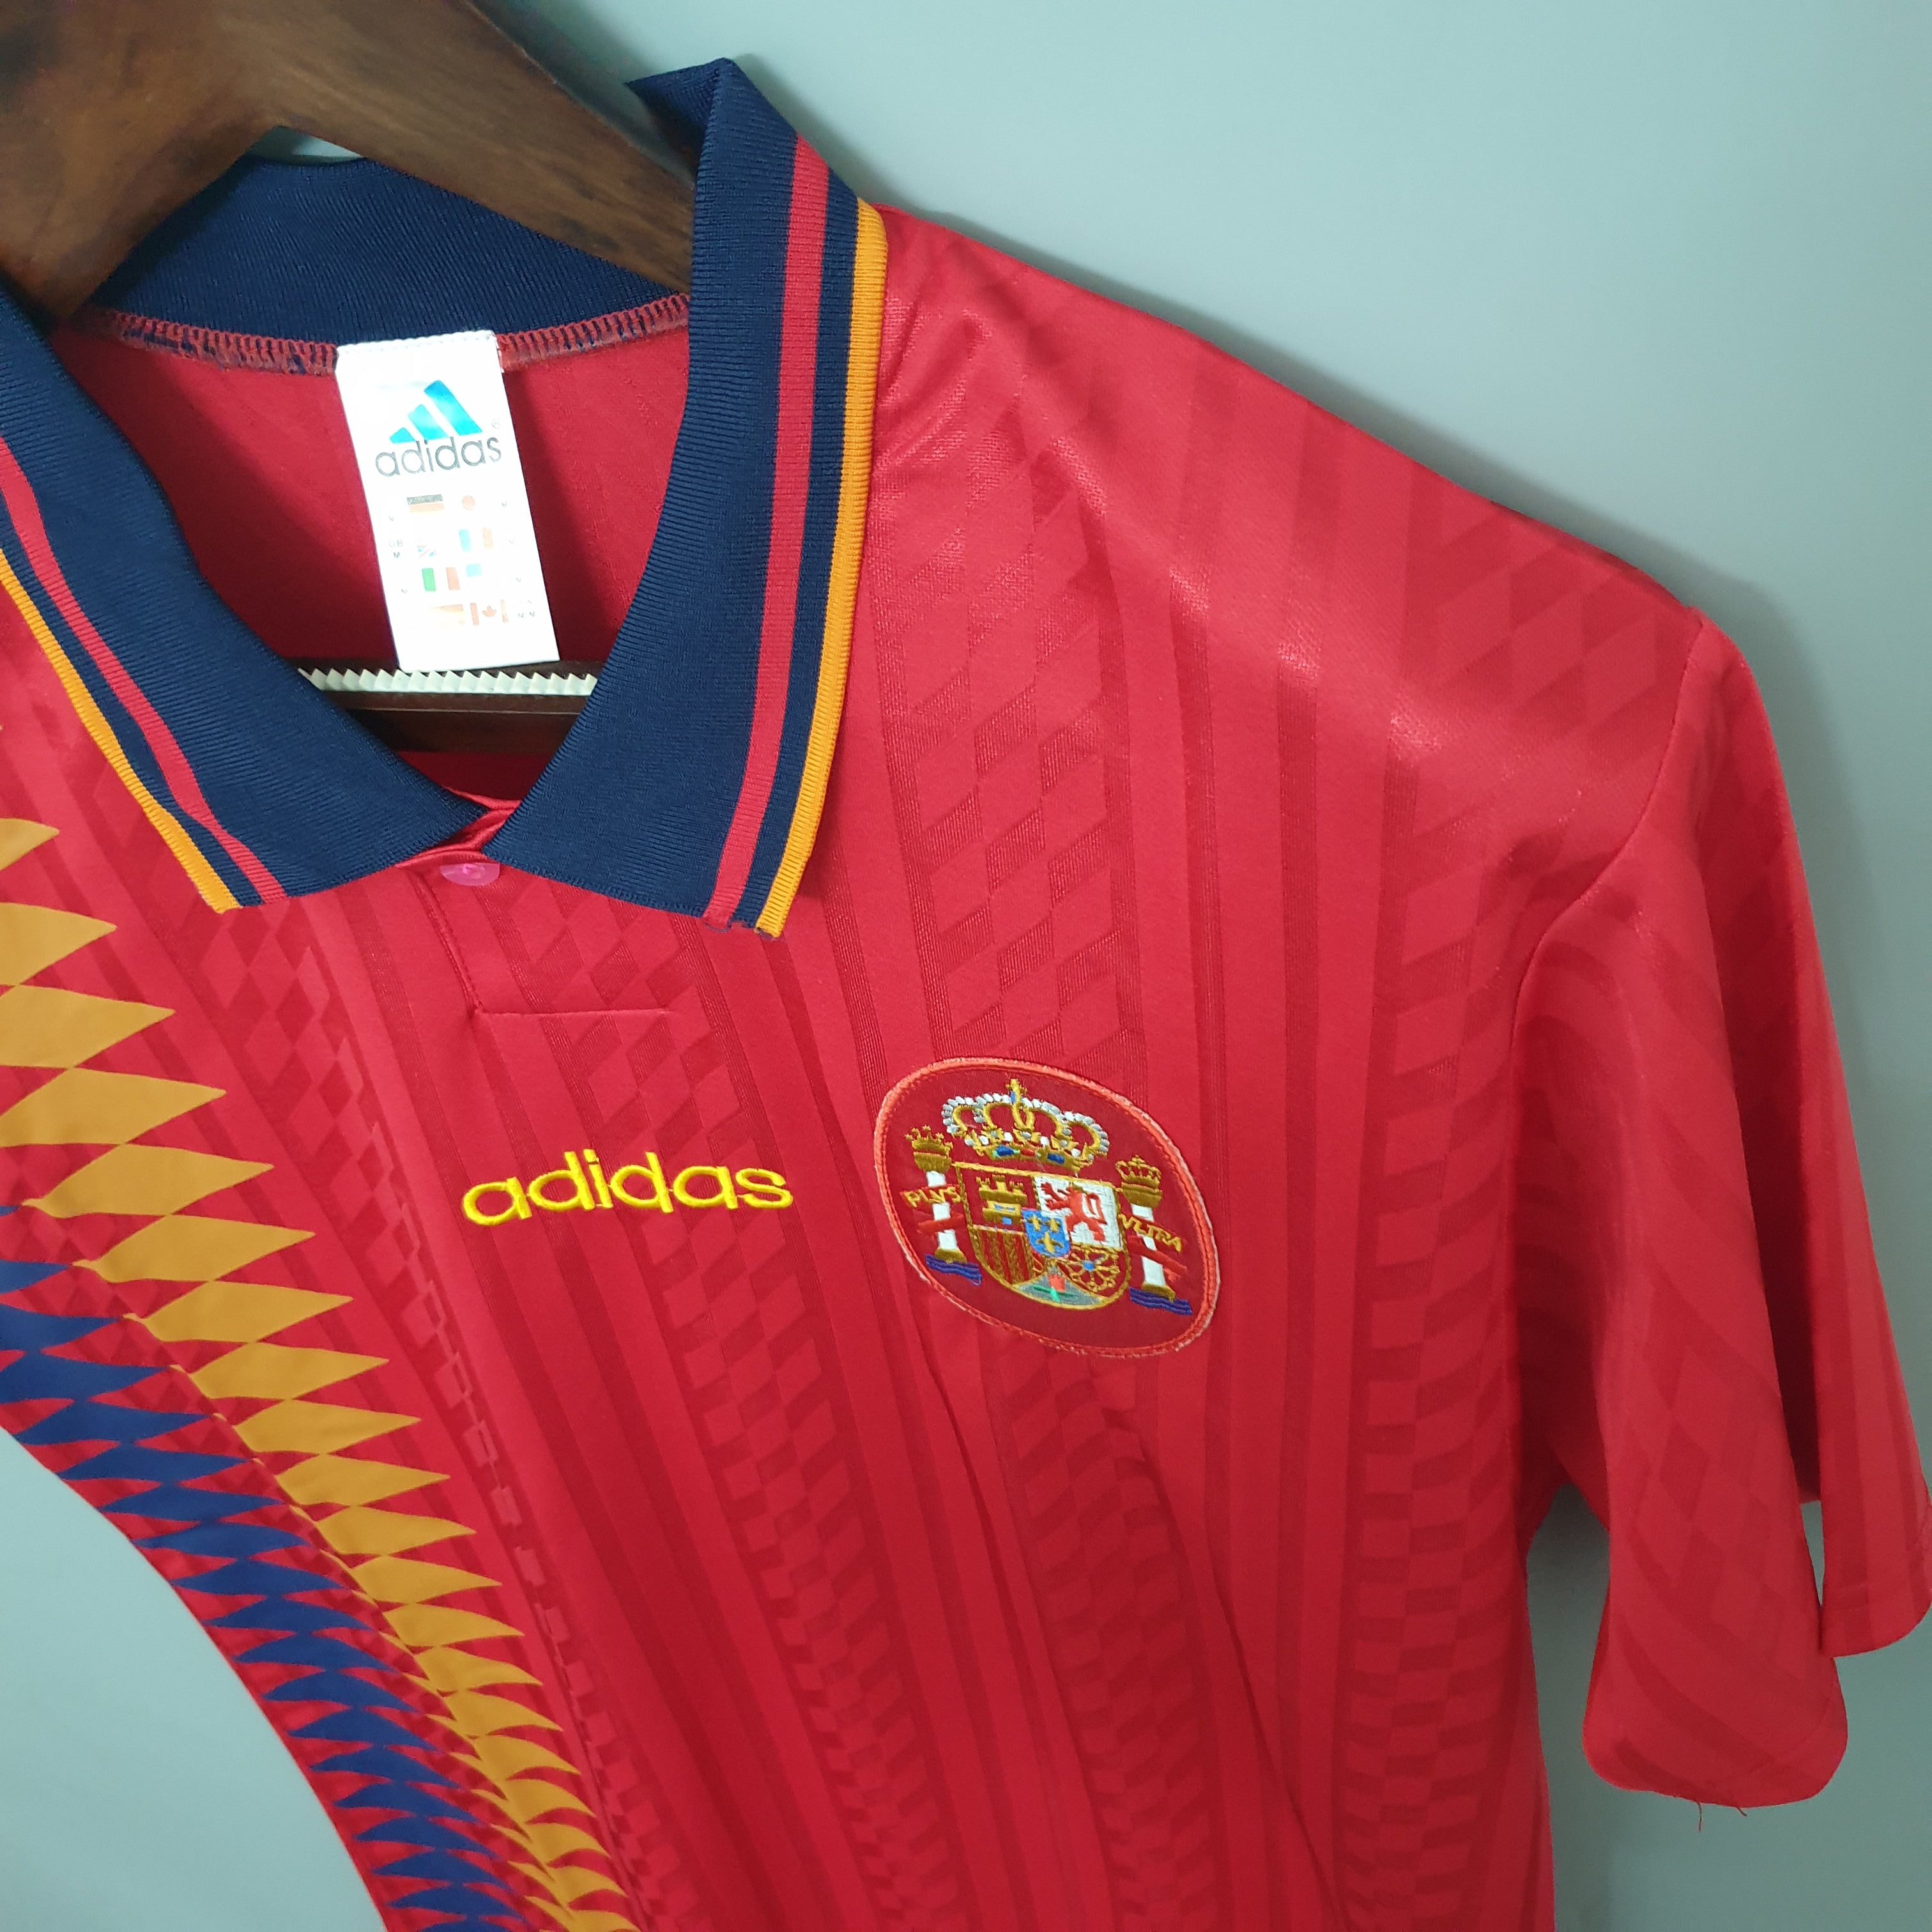 Spain 1994 World Cup Retro Jersey